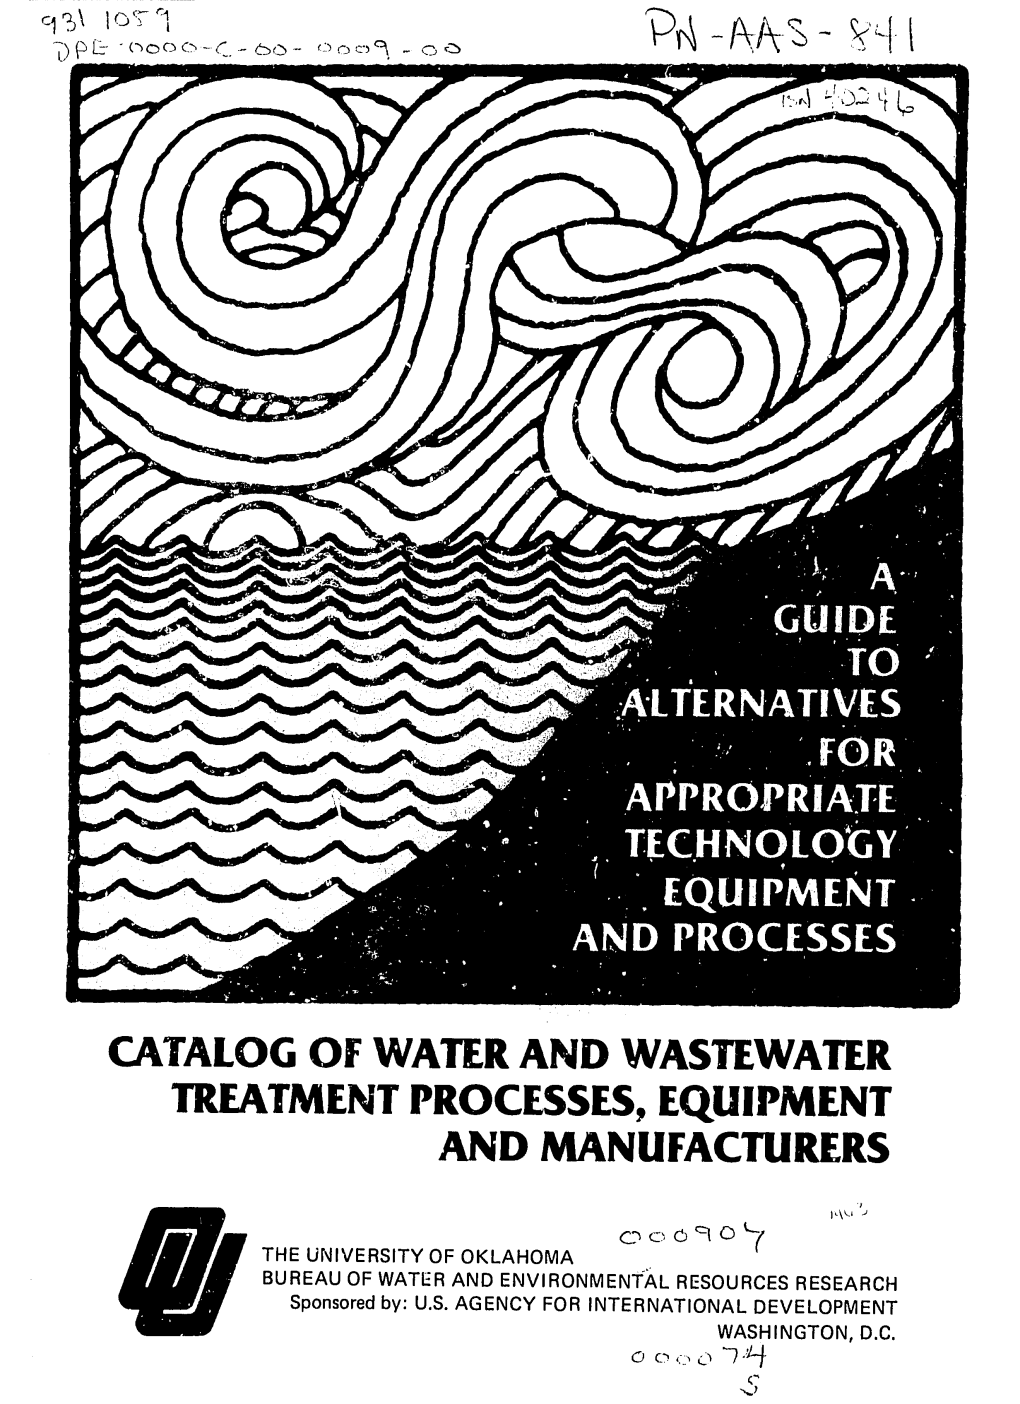 Catalog of Water and Wastewater Treatment Processes, Equipment and Manufacturers